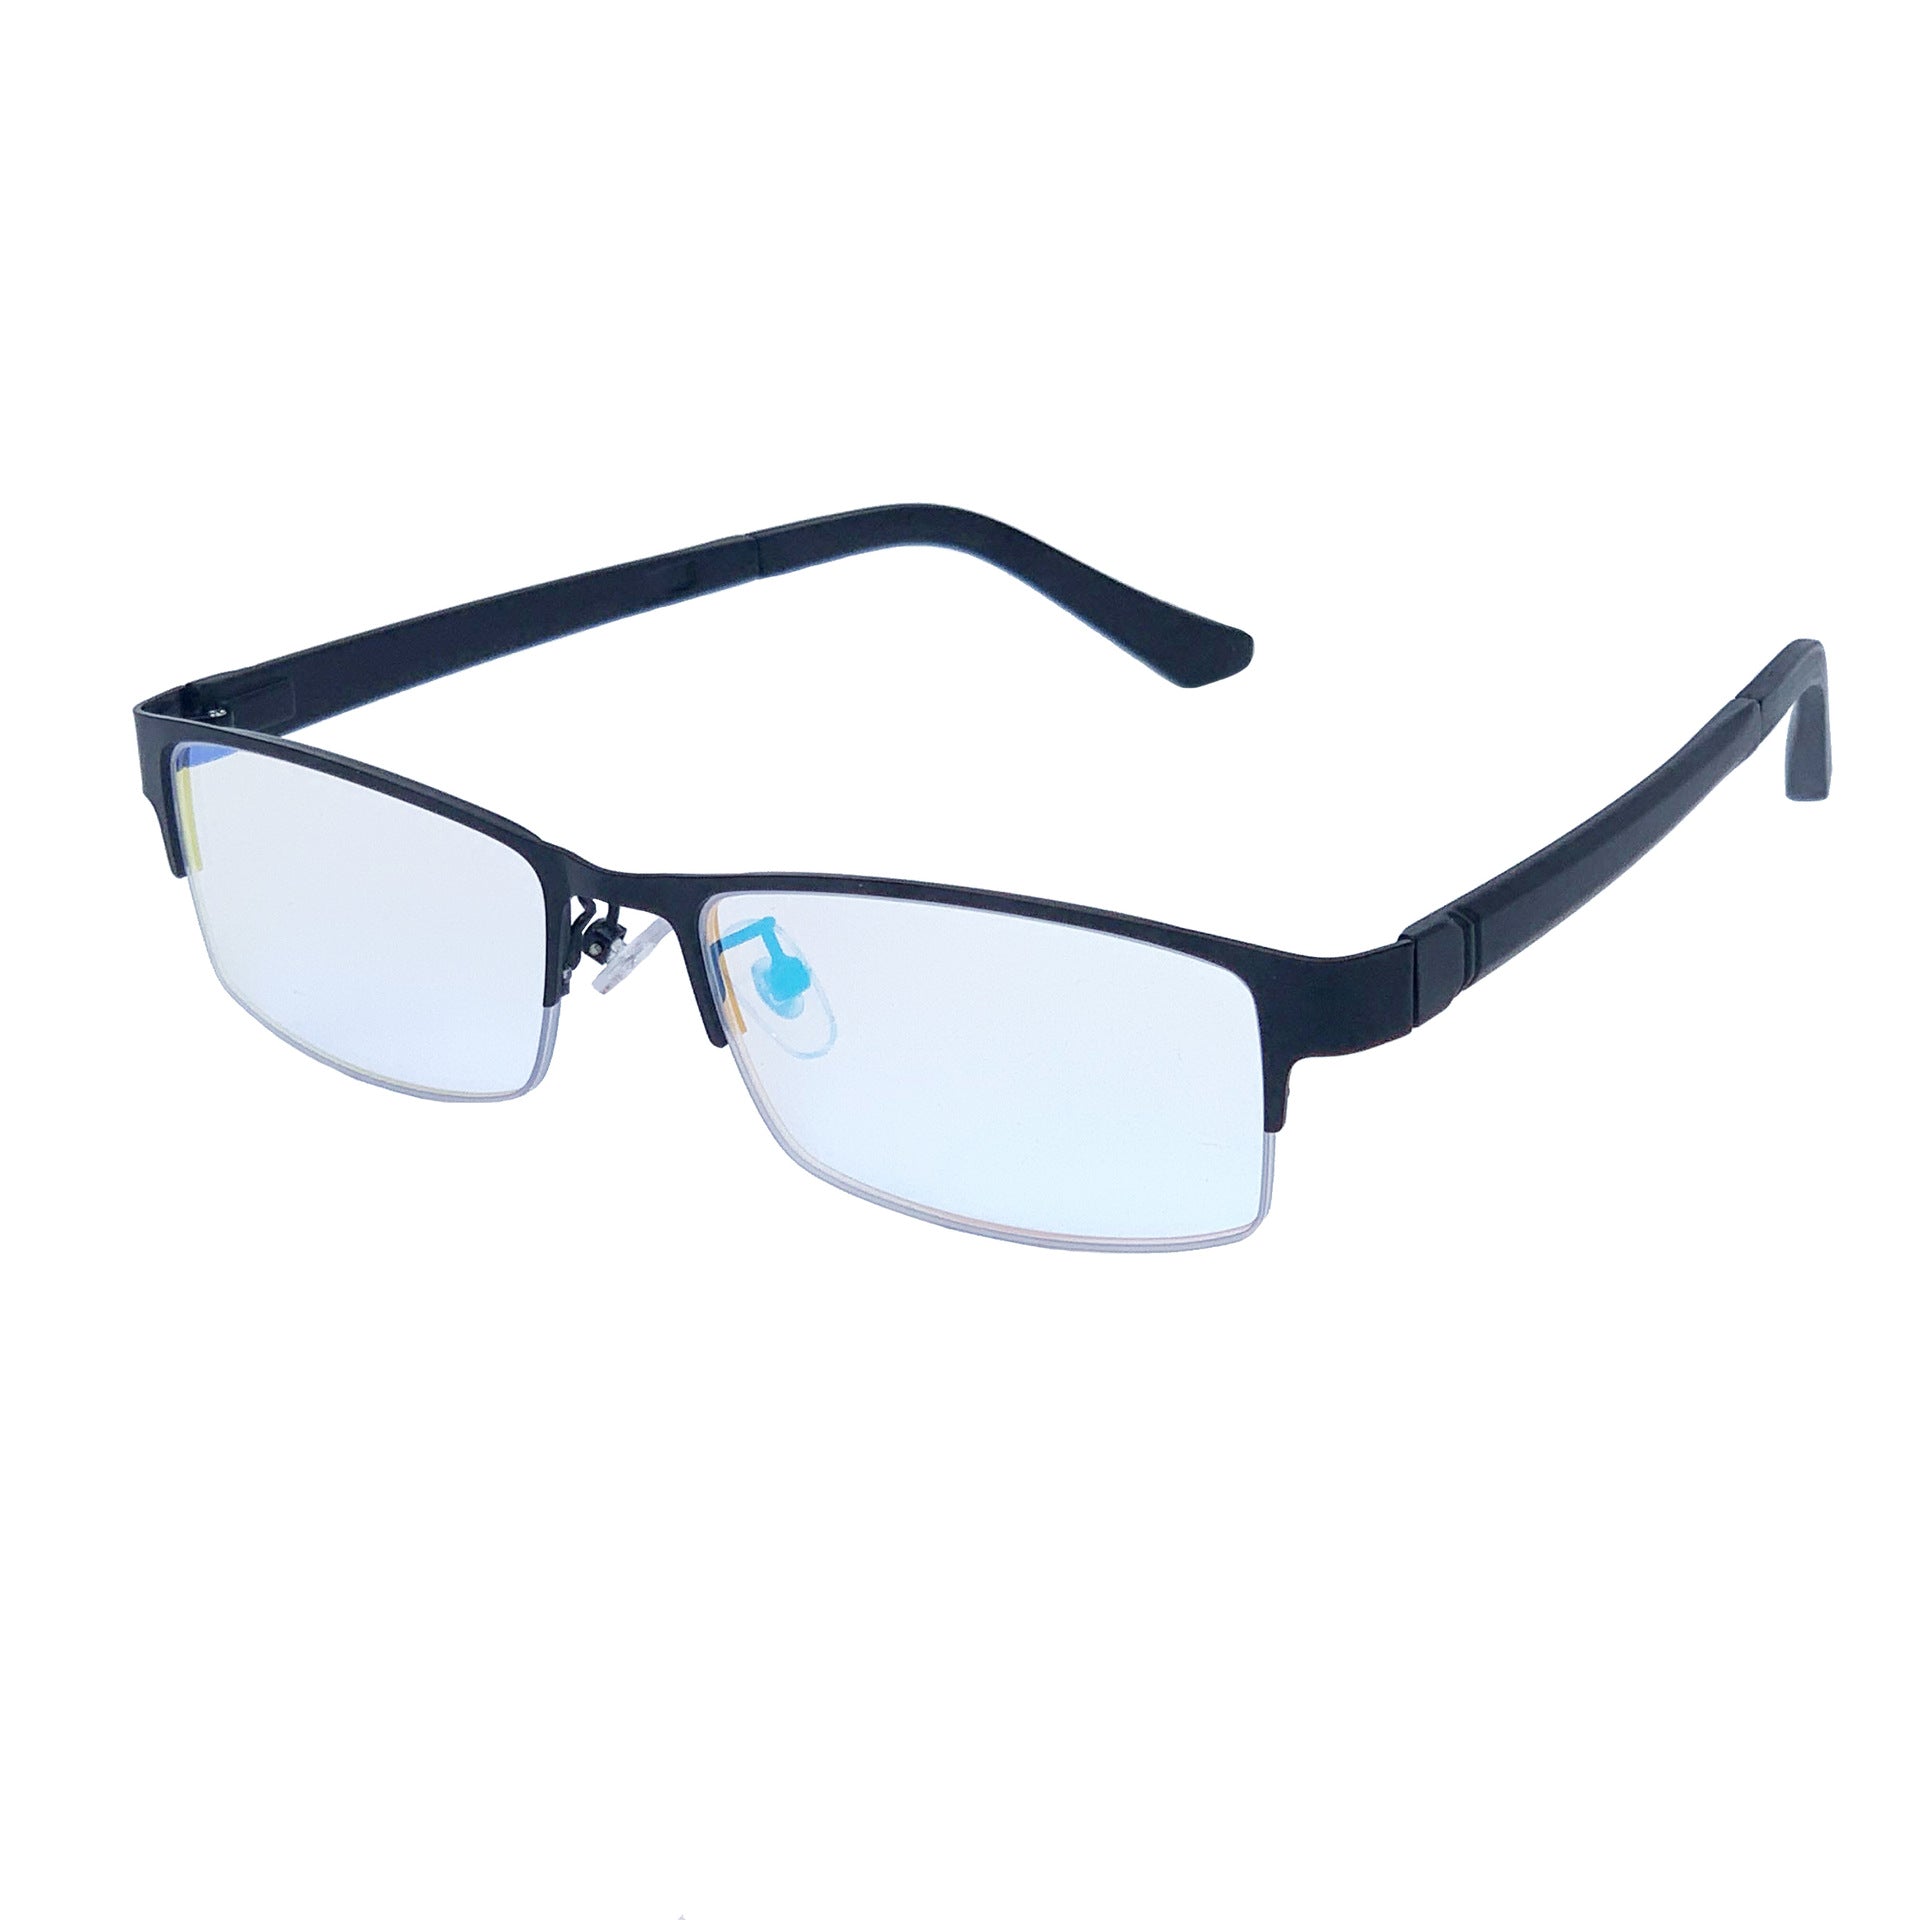 BP-3388 Lens Casual Style Color Blind Glasses for Red-Green Blindness